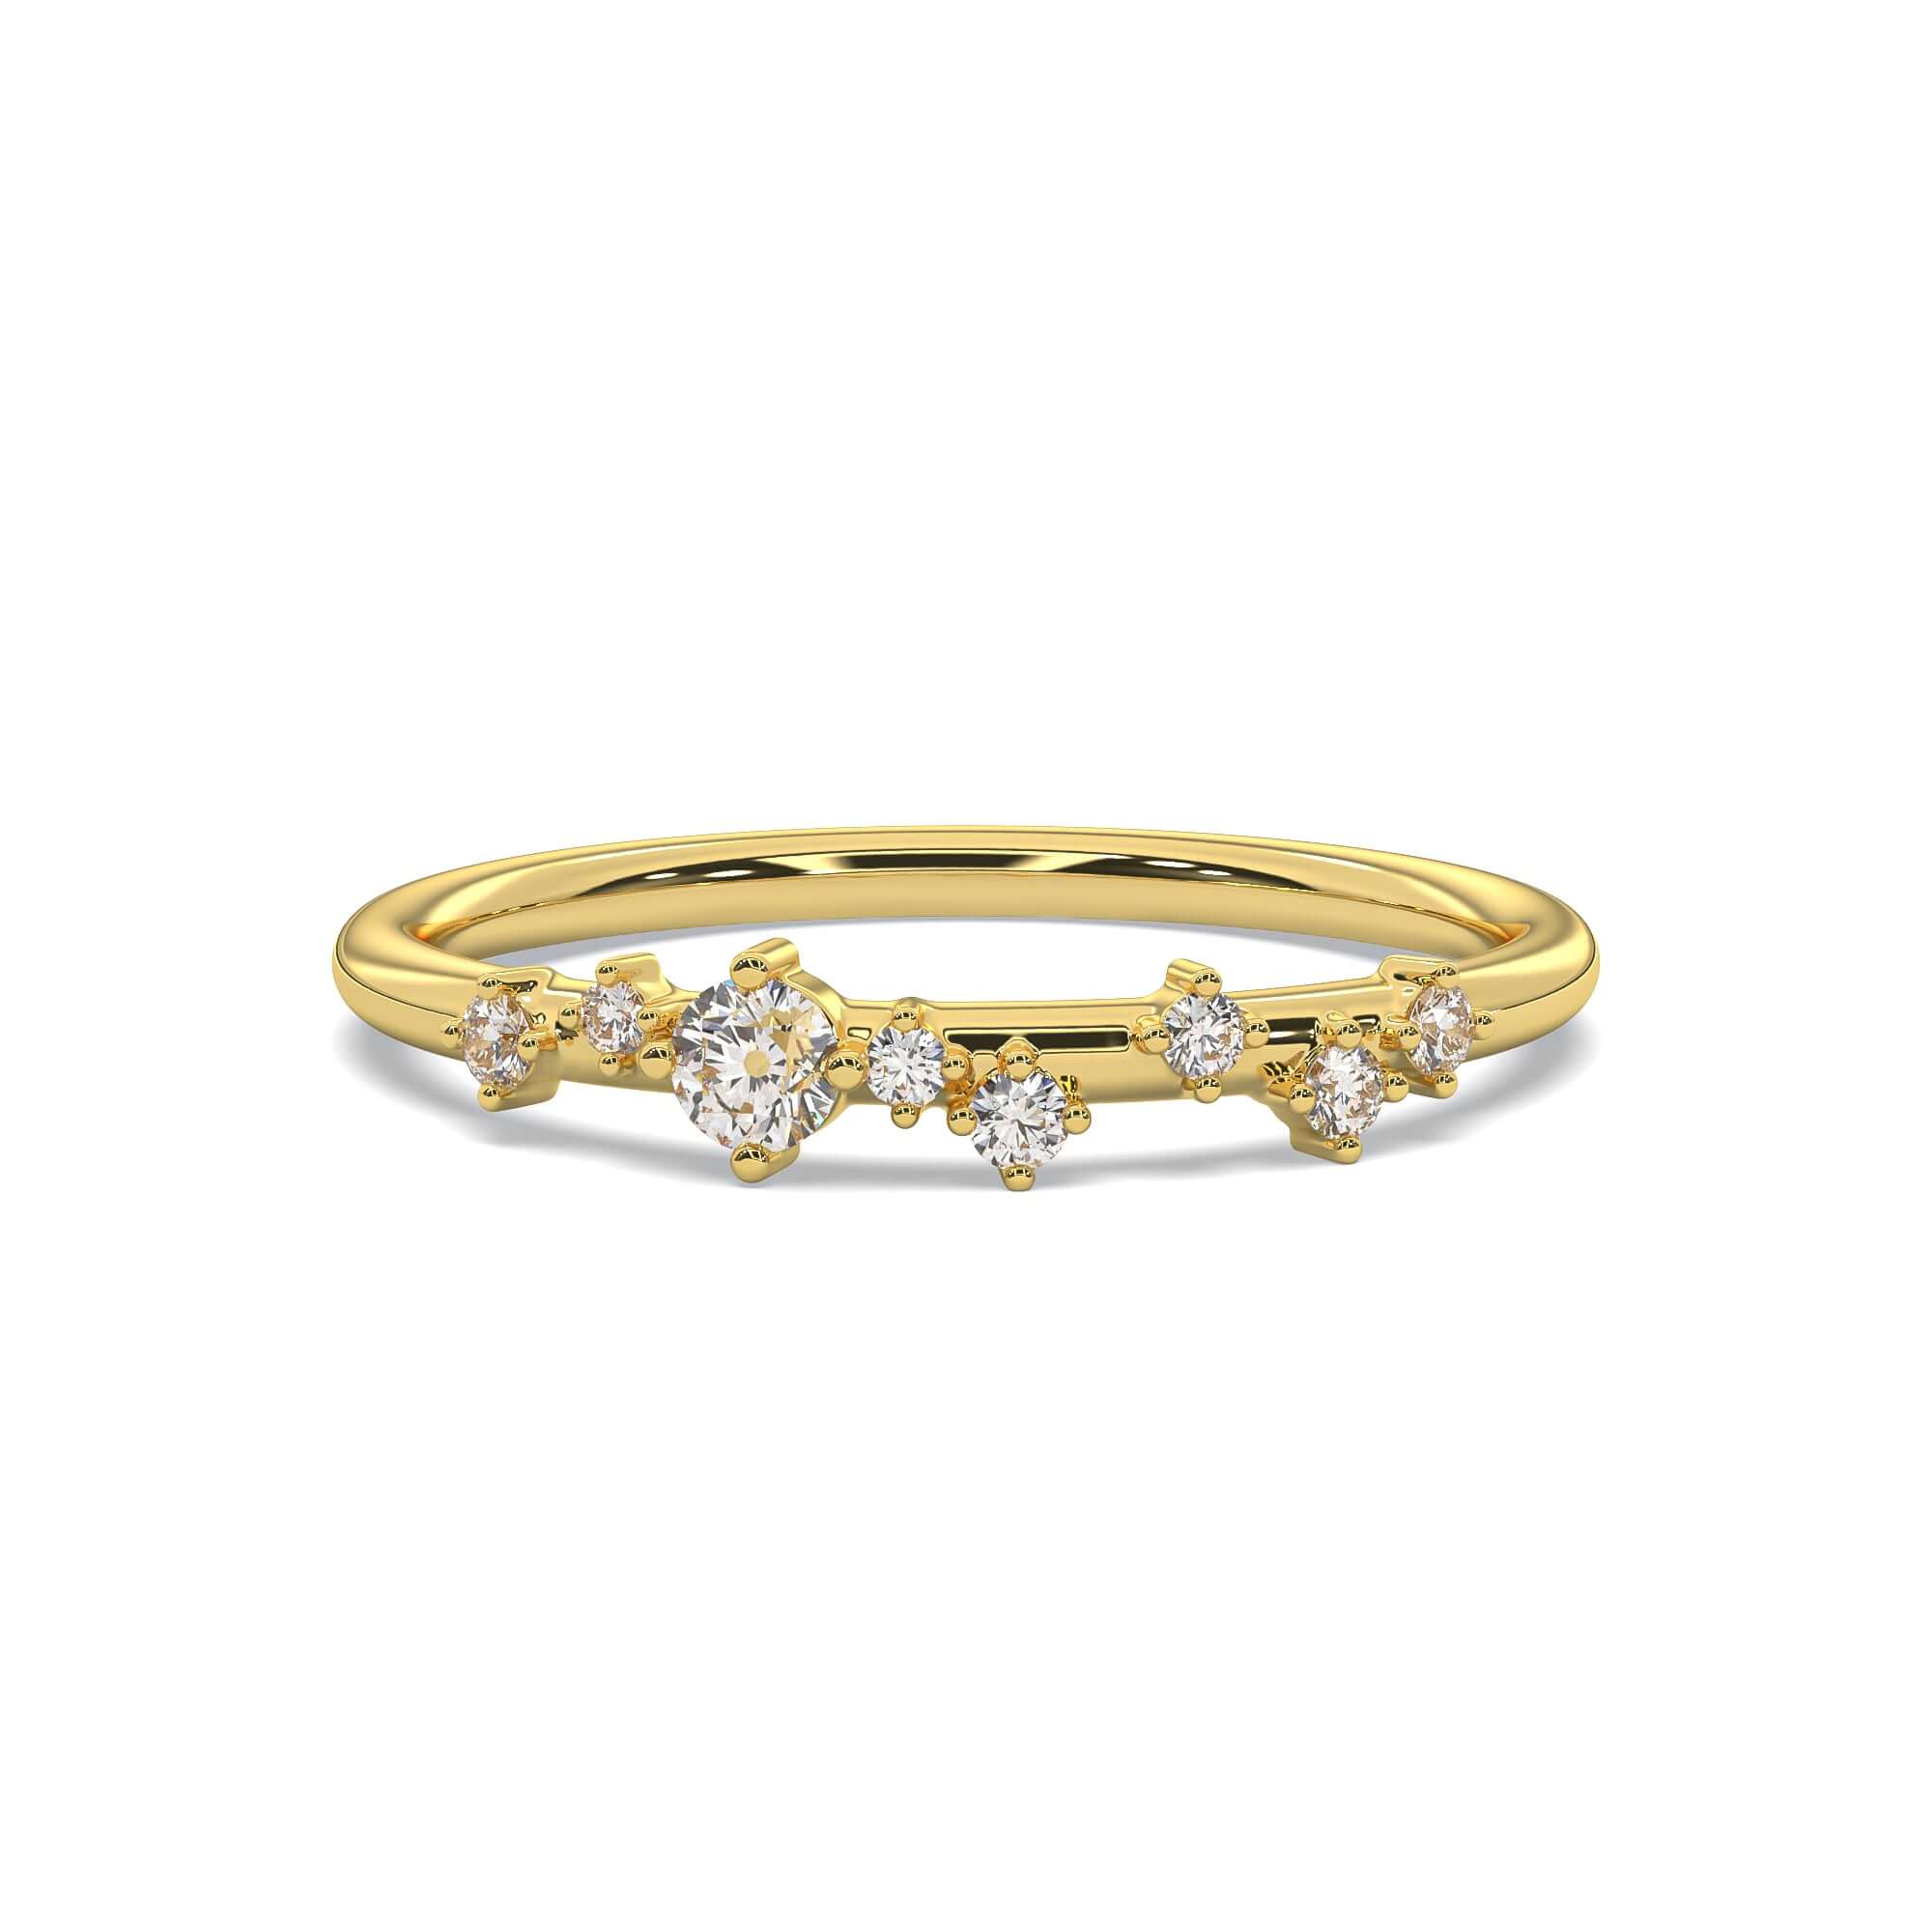 Starry Night - Scattered Diamond Band